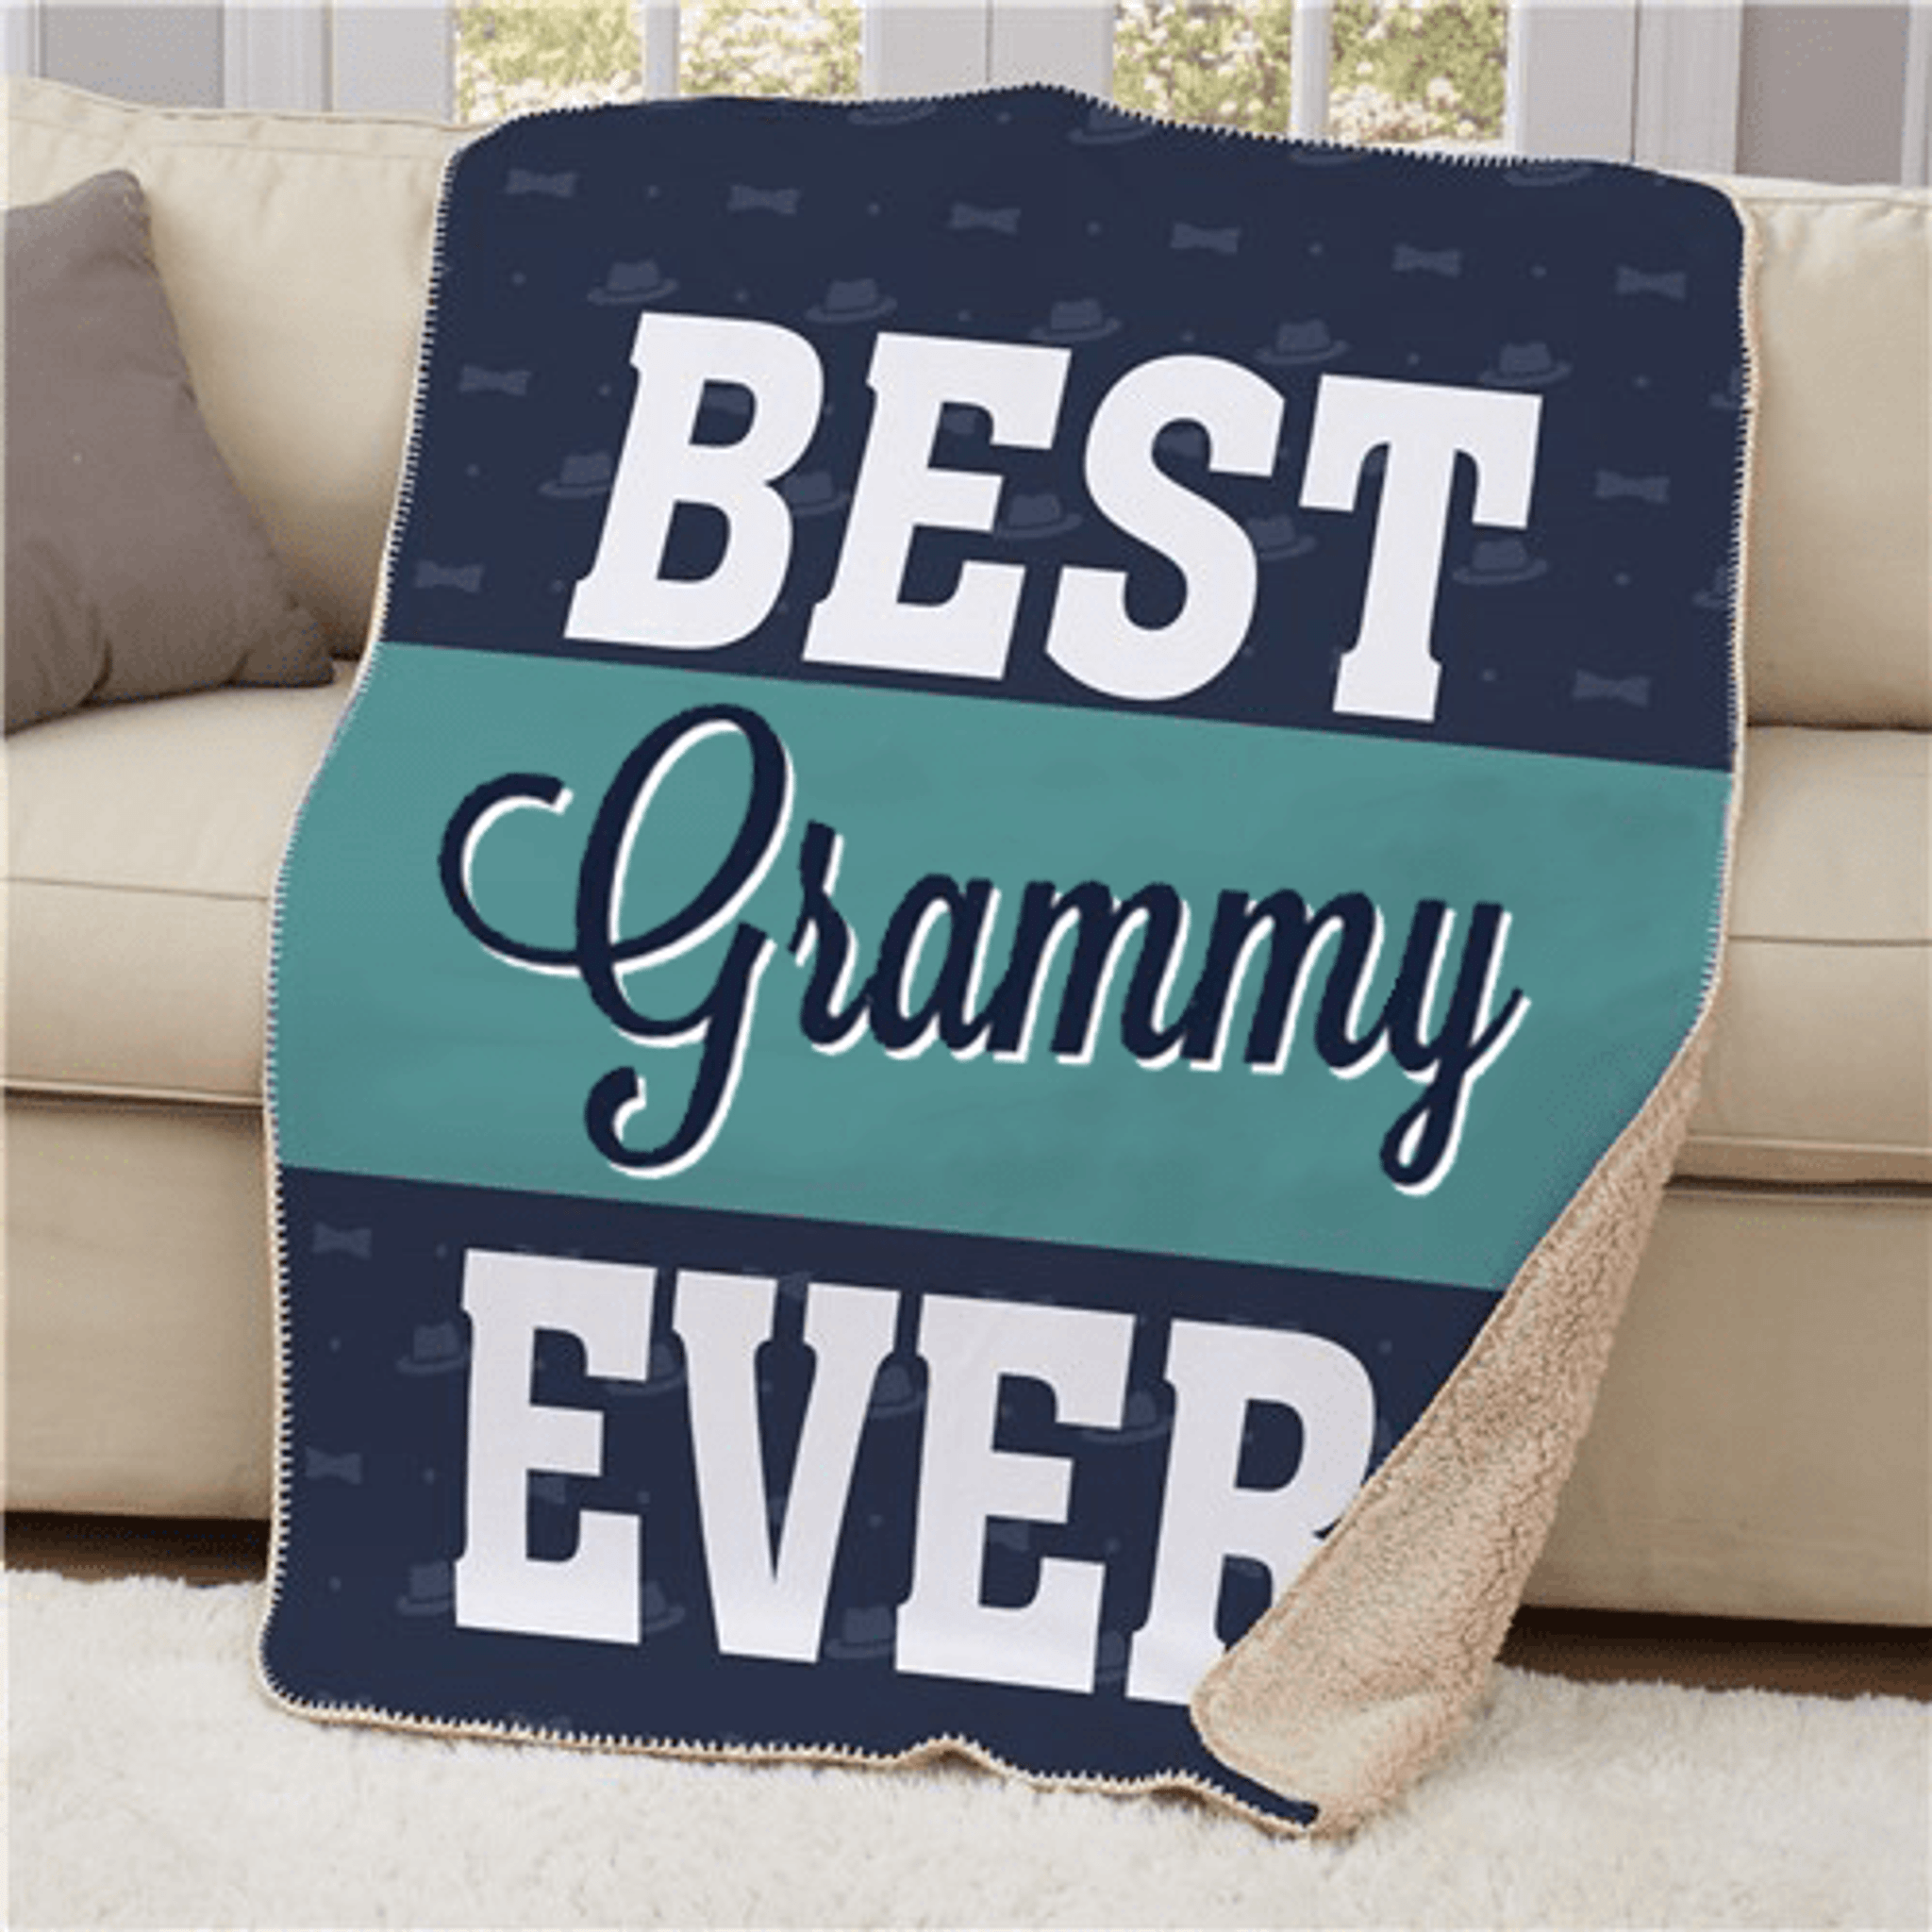 Personalized Sherpa Blanket For The Best Grandma Ever The BananaNana Shoppe